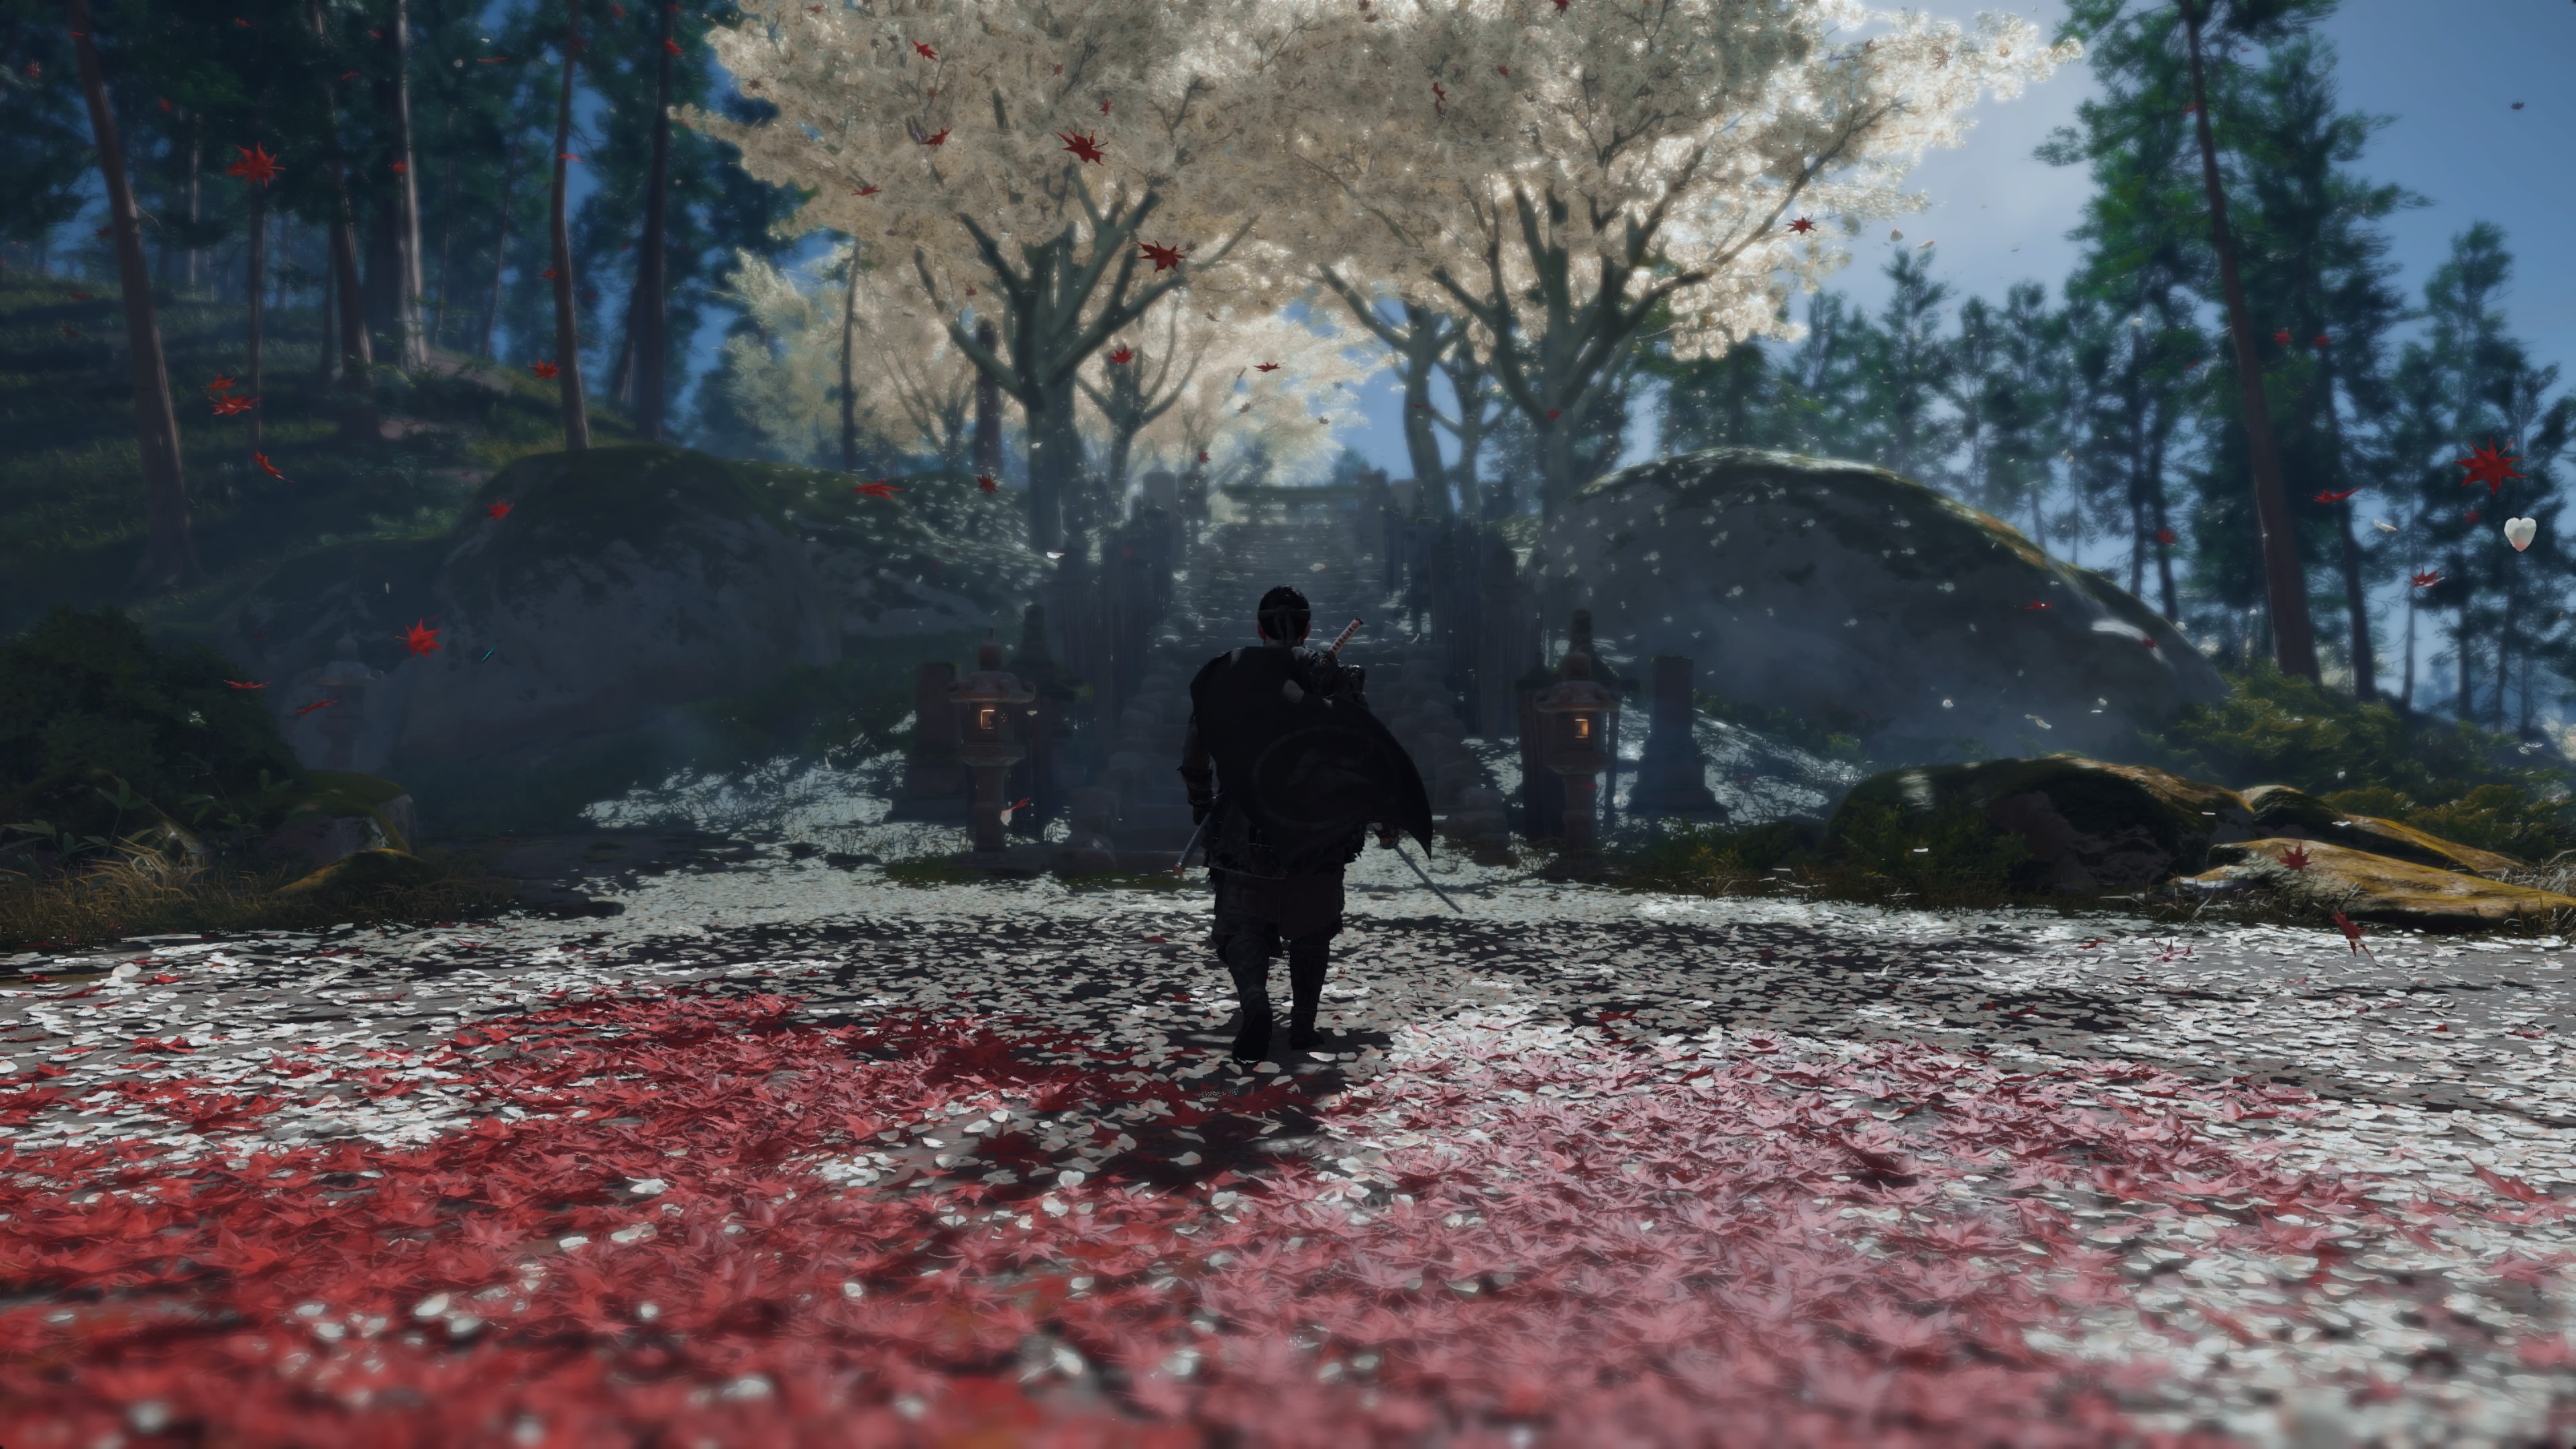 General 3840x2160 samurai Ghost of Tsushima  PlayStation 4 video games PlayStation Activision Sucker Punch Productions video game characters CGI video game art screen shot standing trees hills path